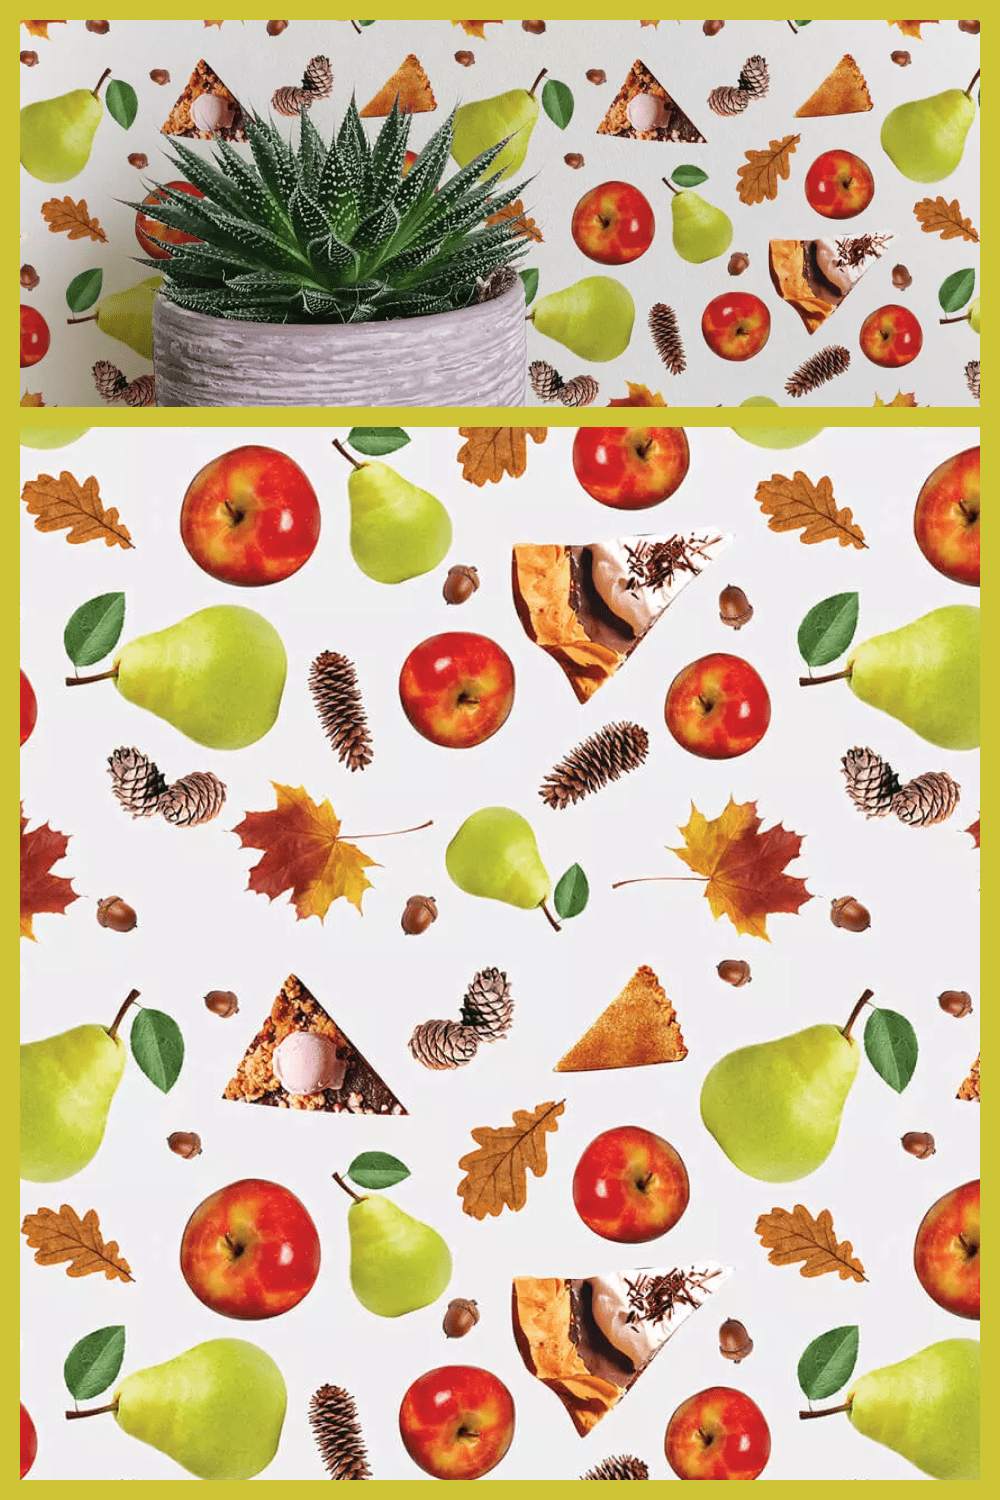 Apples, pears, cones, leaves, pieces of pie on a white background.